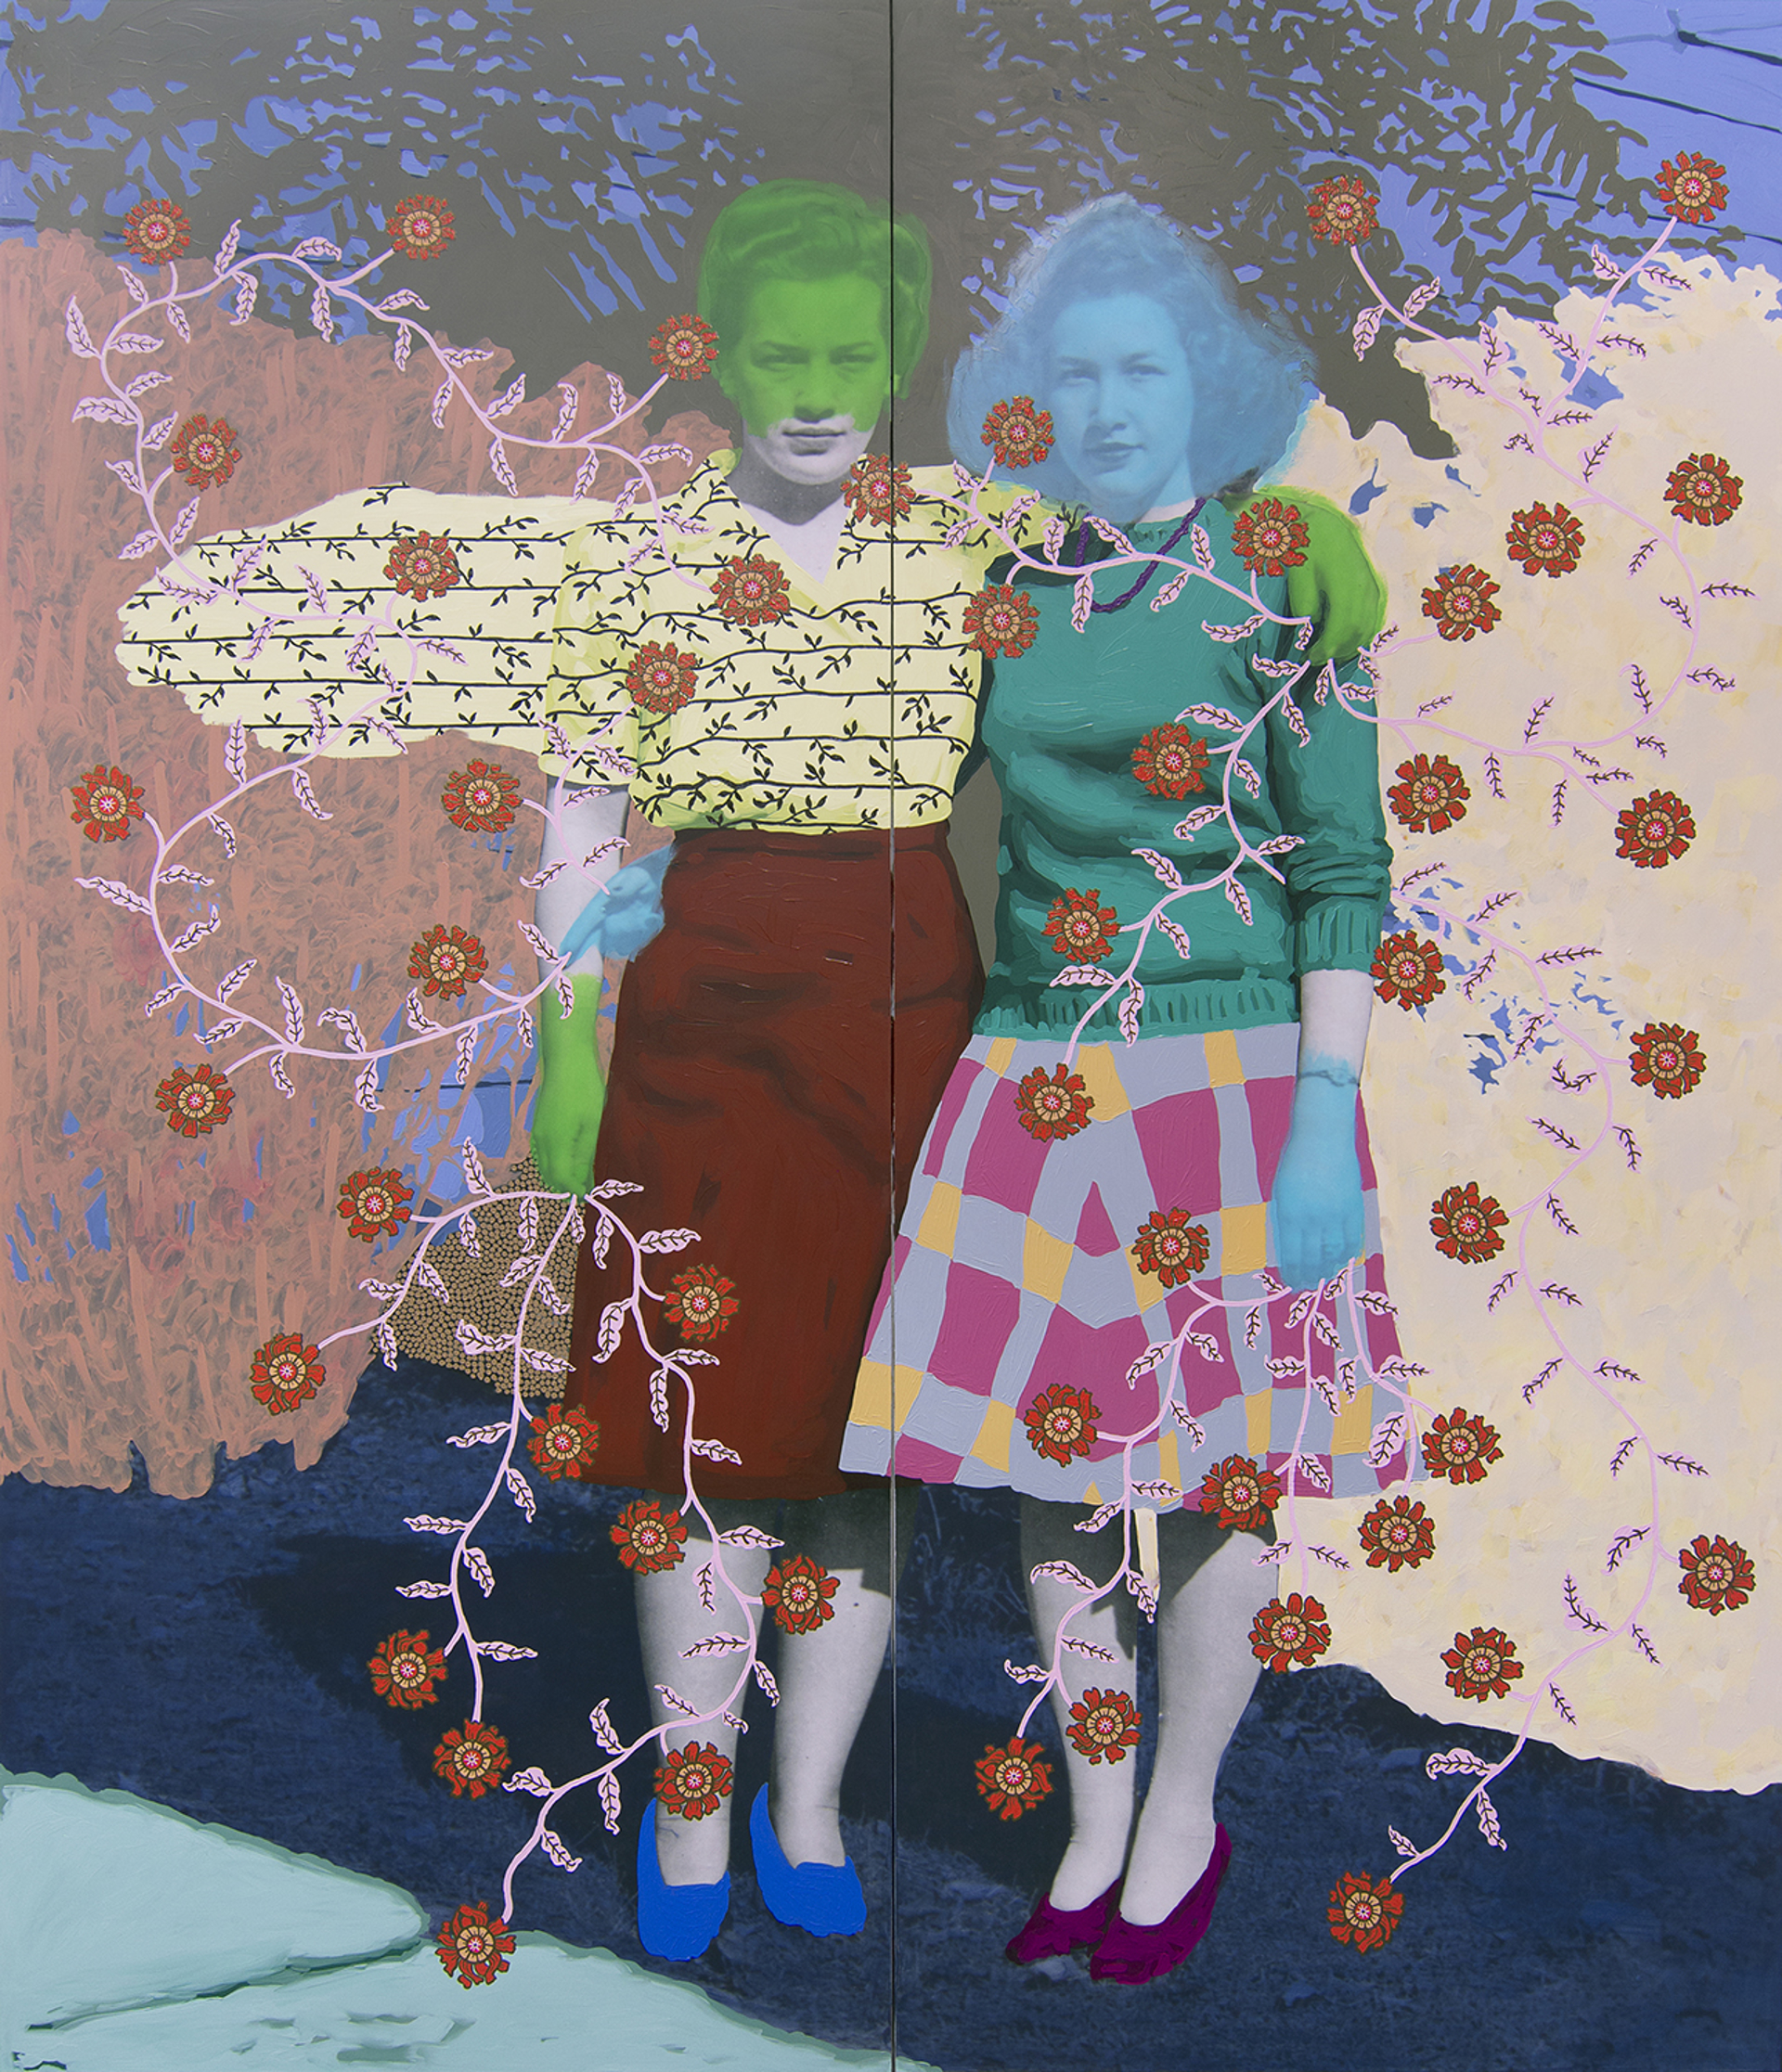 Untitled (Sisters Between Hedges) by Daisy Patton